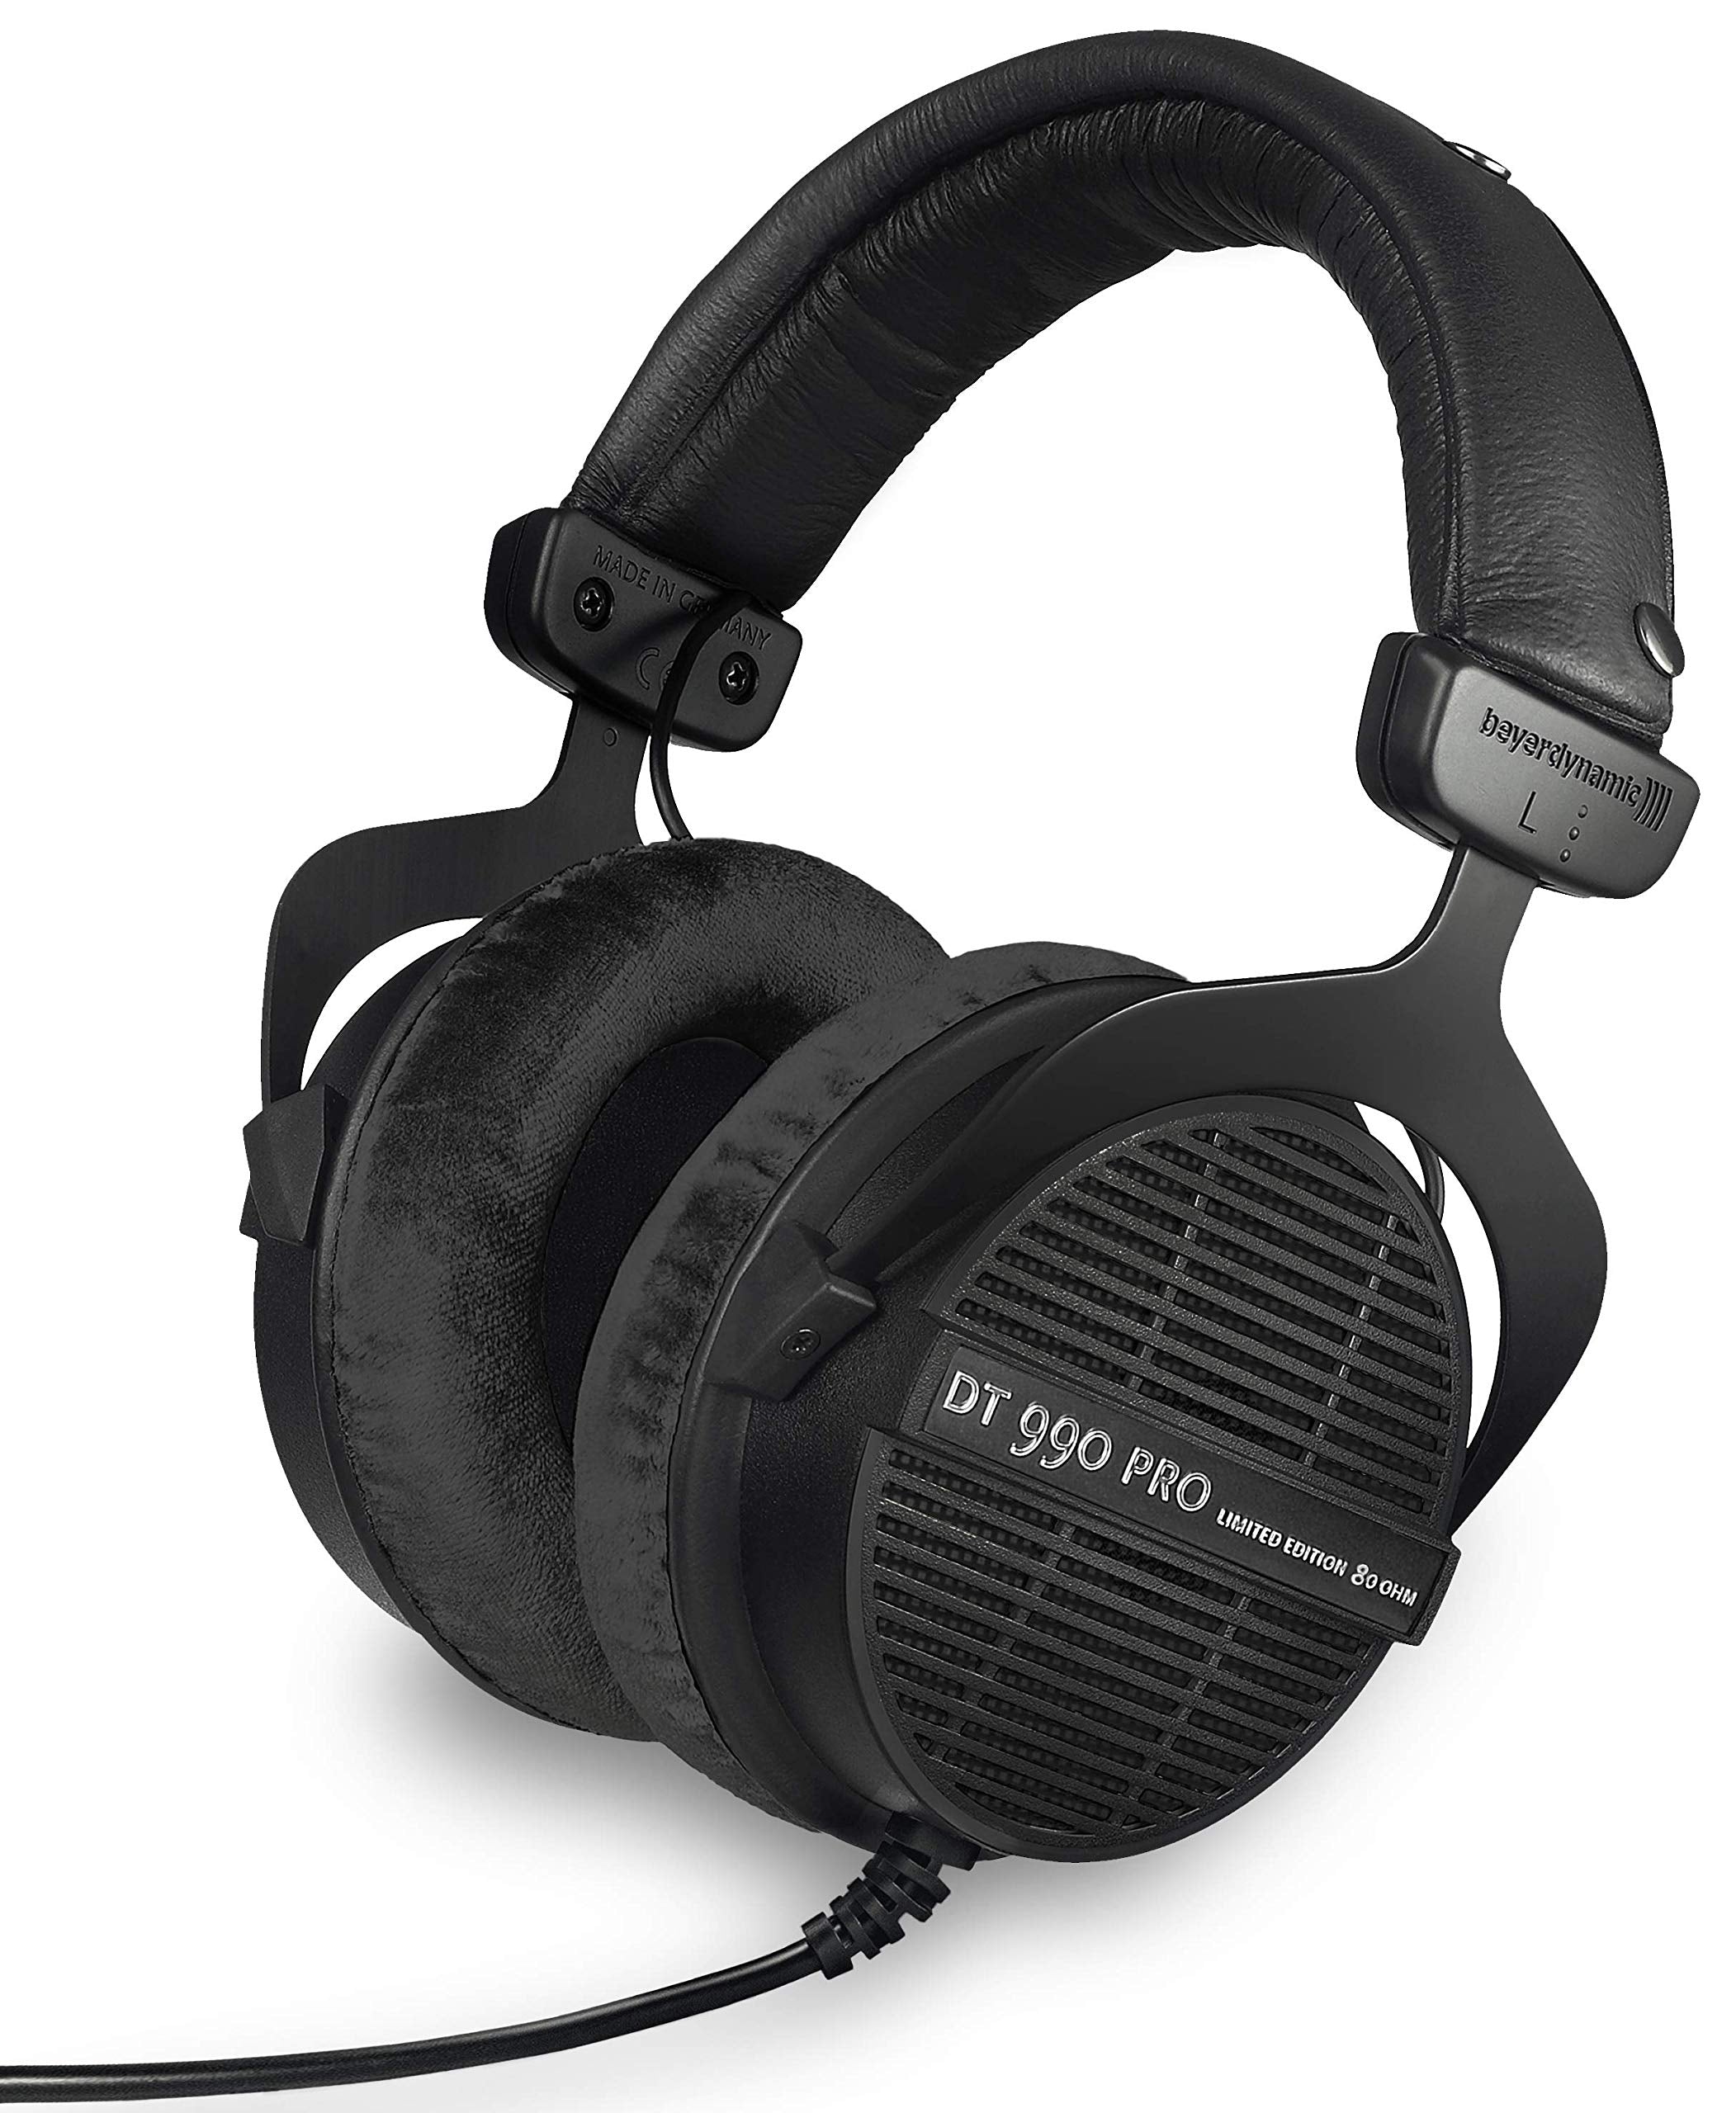 beyerdynamic Dt 990 Pro Over-Ear Studio Monitor Headphones - Open-Back Stereo Construction, Wired (80 Ohm, Black (Limited Edition)) (7579047952622)